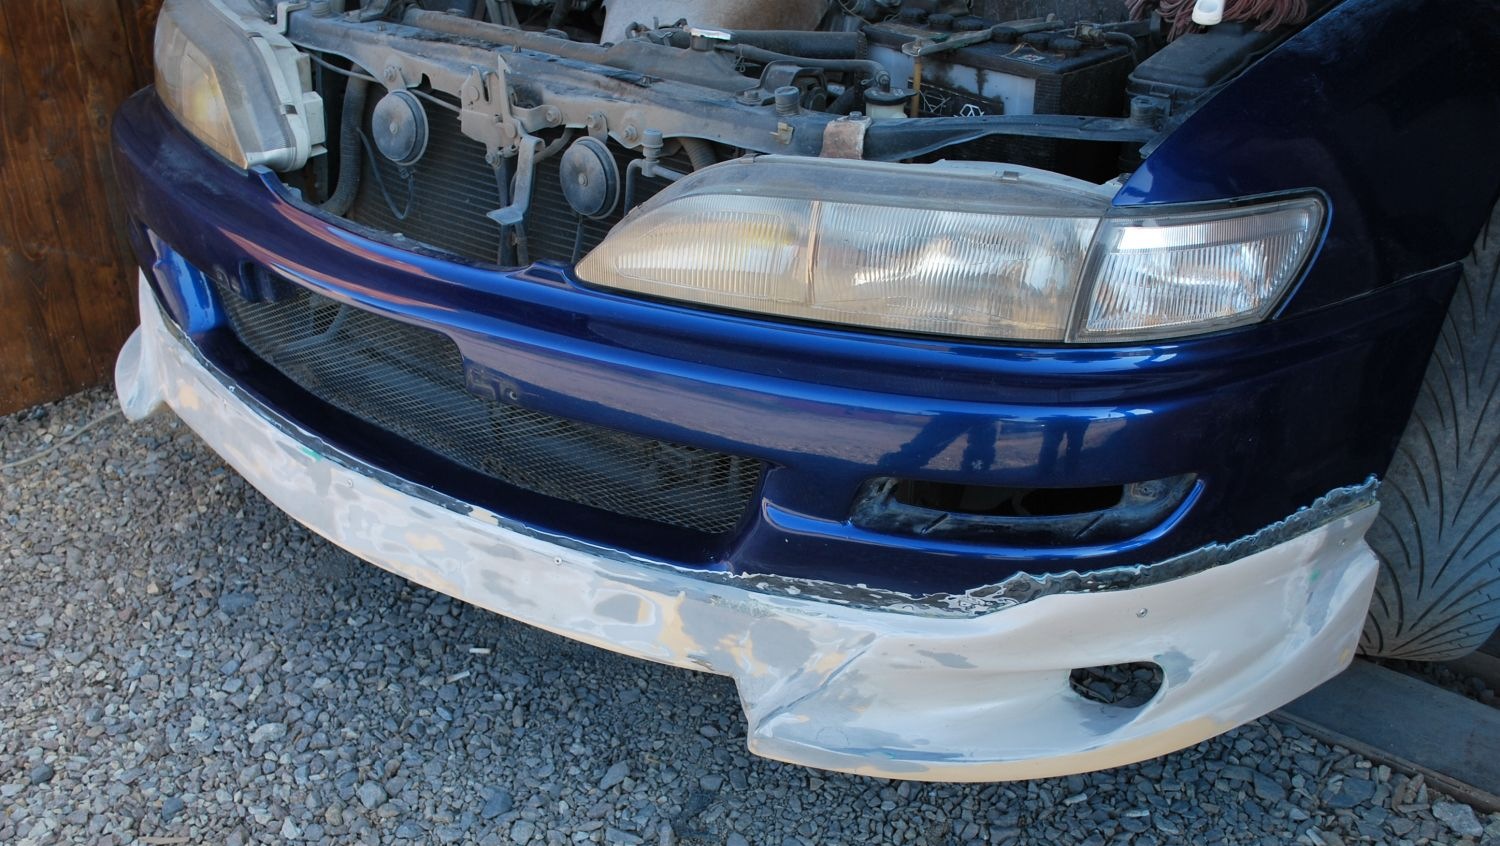 Continuing variations on the TRD theme  Bumper  - Toyota Carina ED 20 L 1994